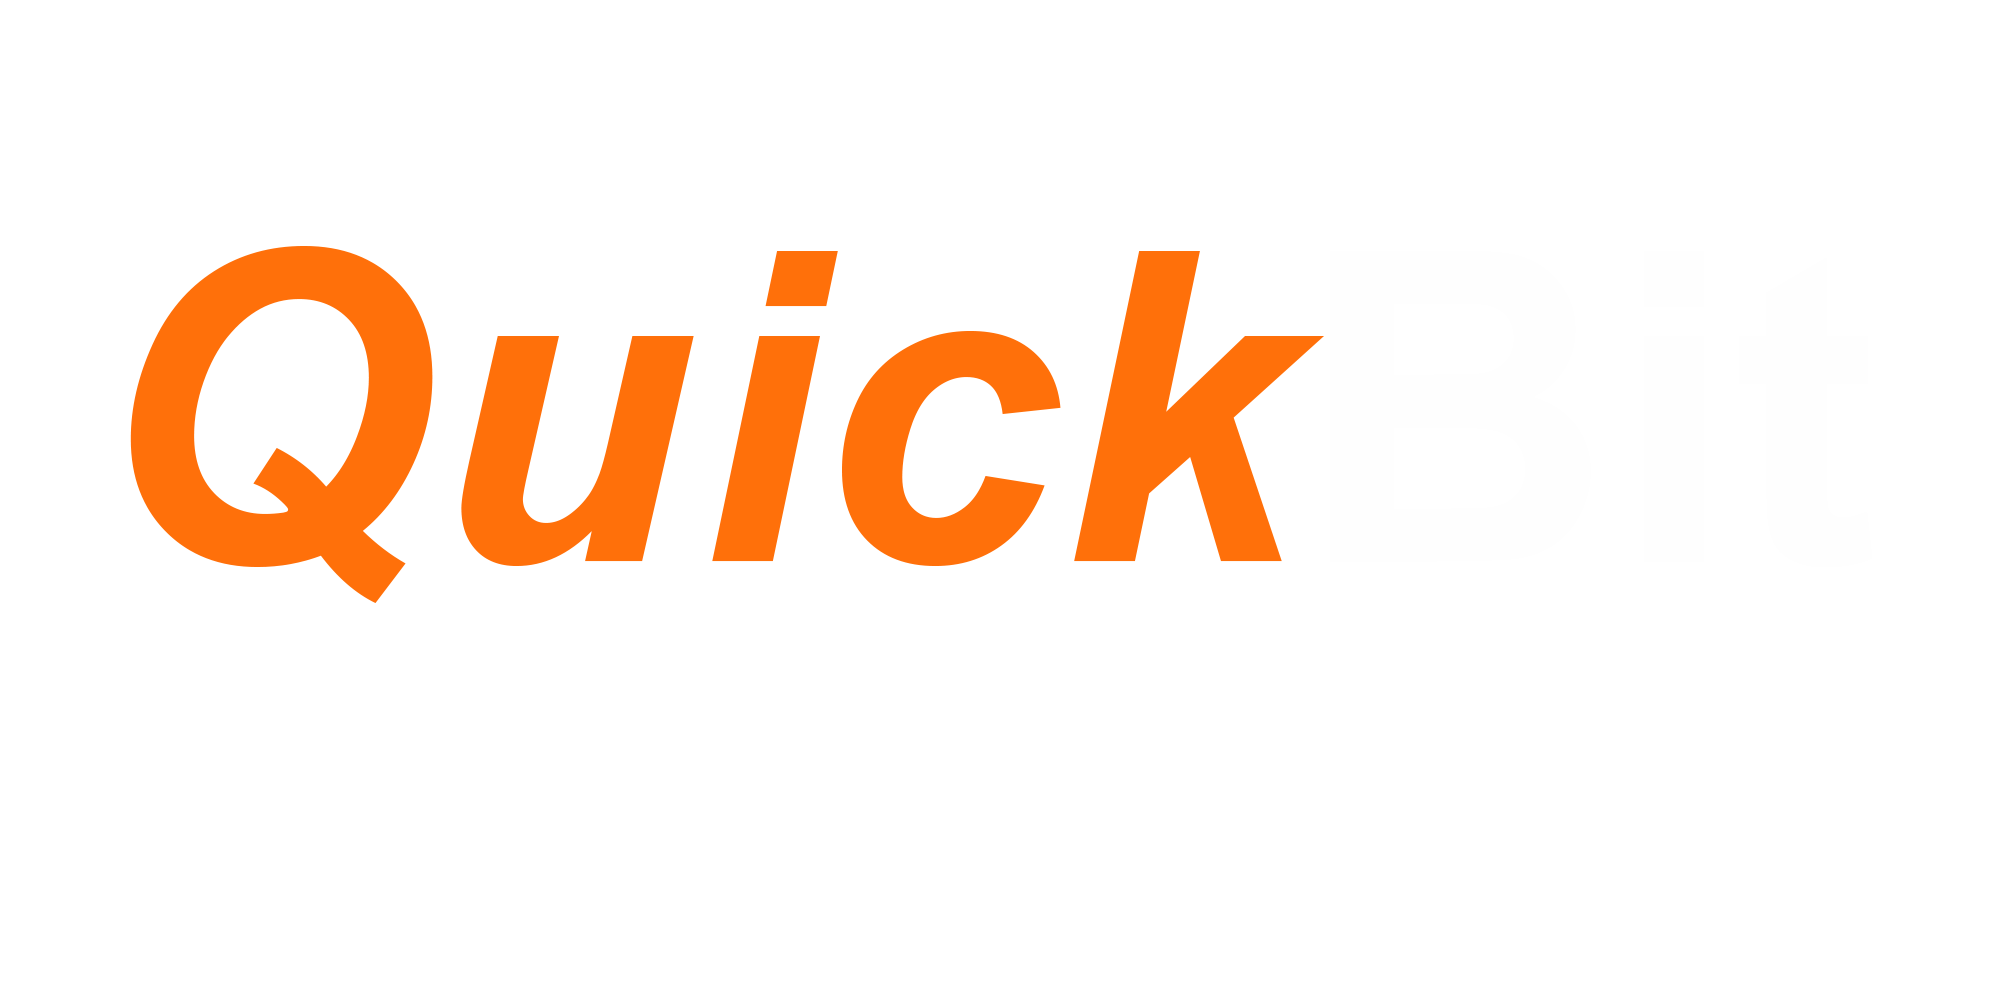 quickbit crypto boutique logo quick is orange the rest of the logo is white